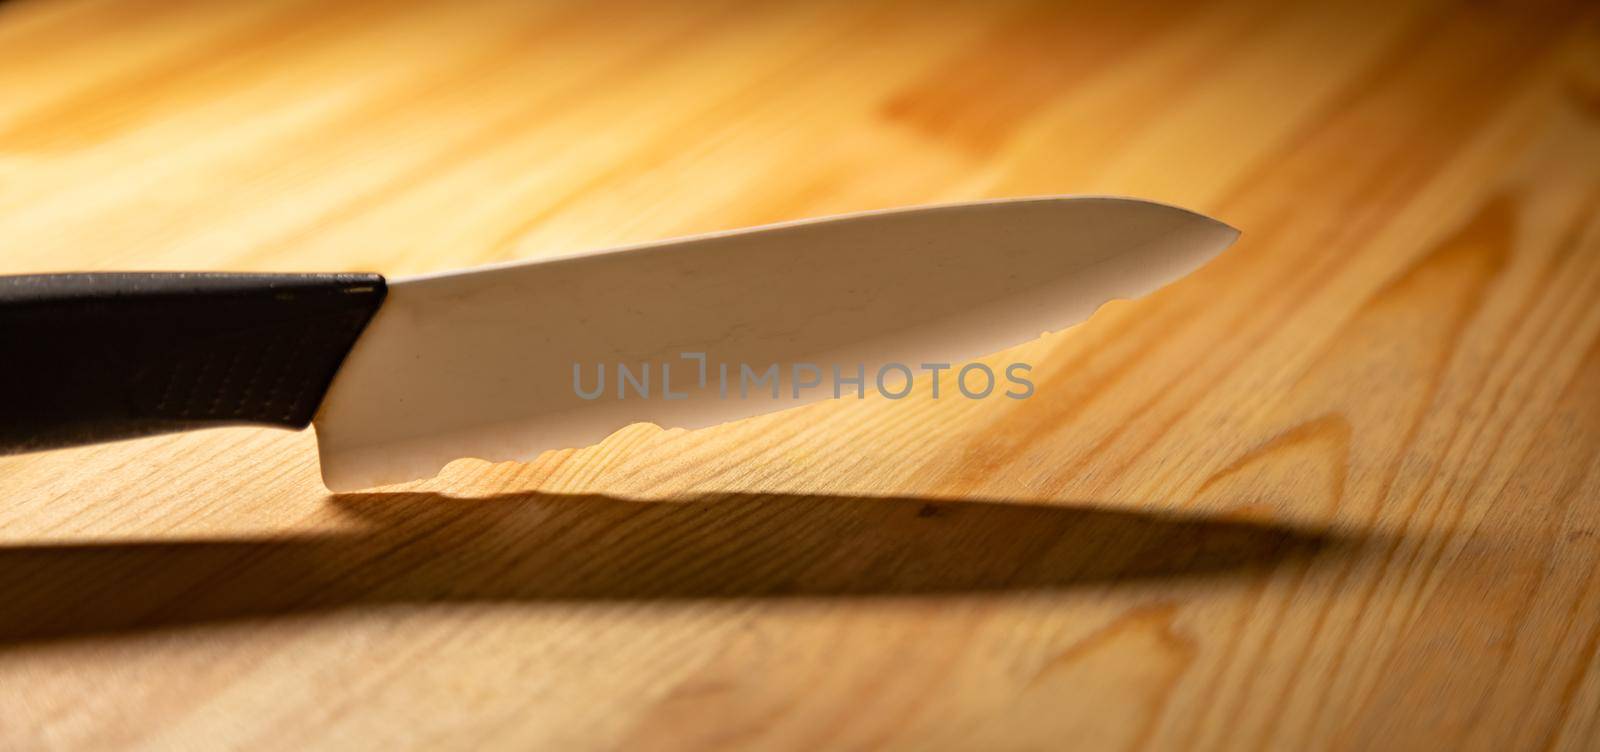 close up old white ceramic knife with a chipped blade. broken substandard knife